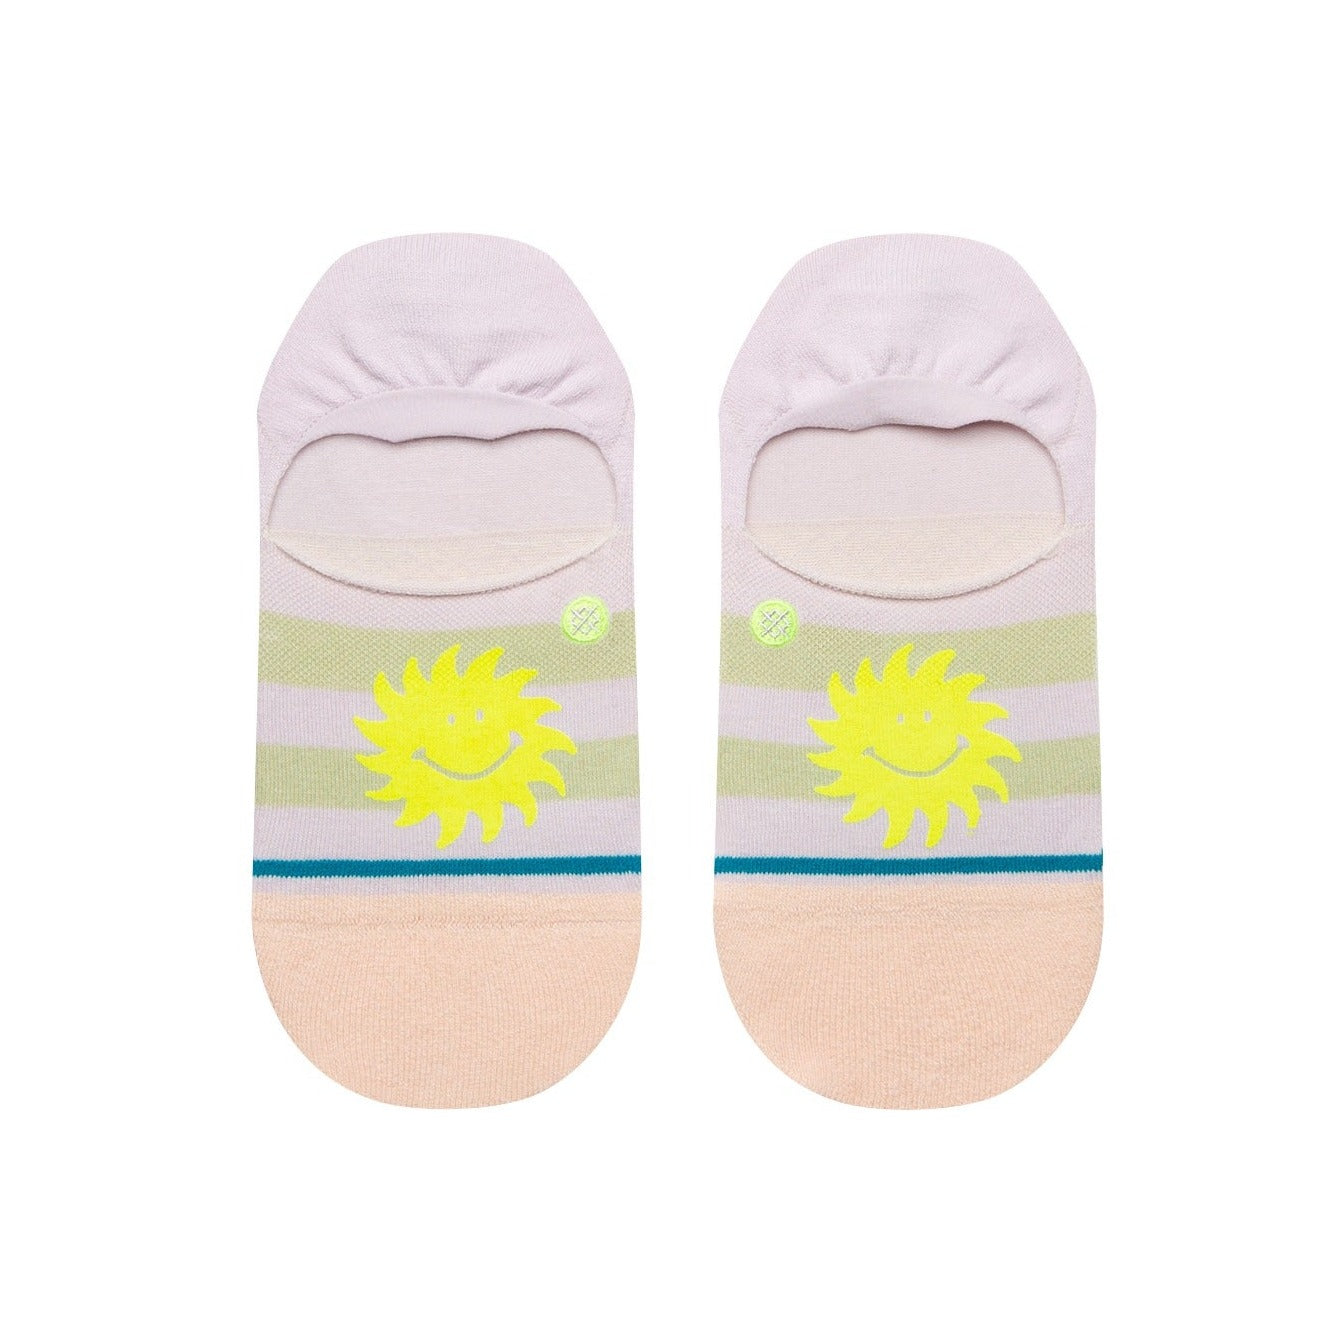 Stance Women's No Show Socks - Smiley No Show - Ray Rays